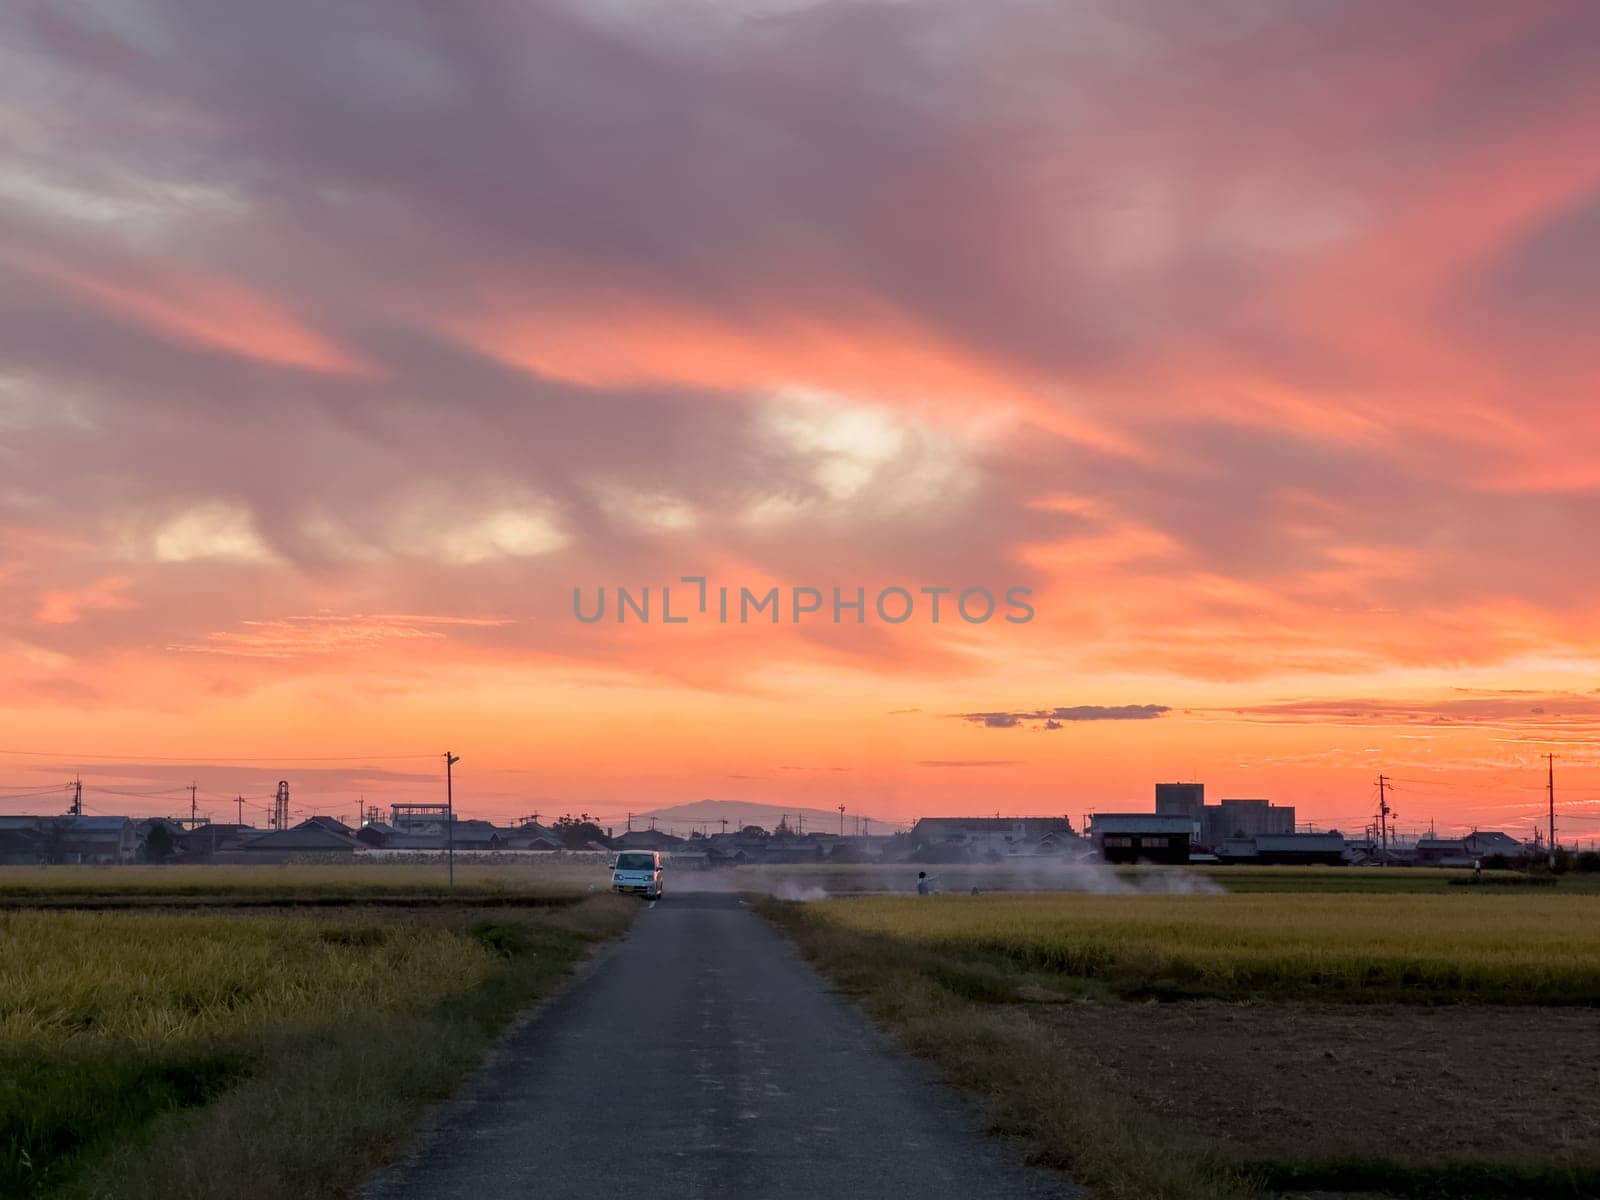 Country road by controlled burn in fields outside town at sunset. High quality photo